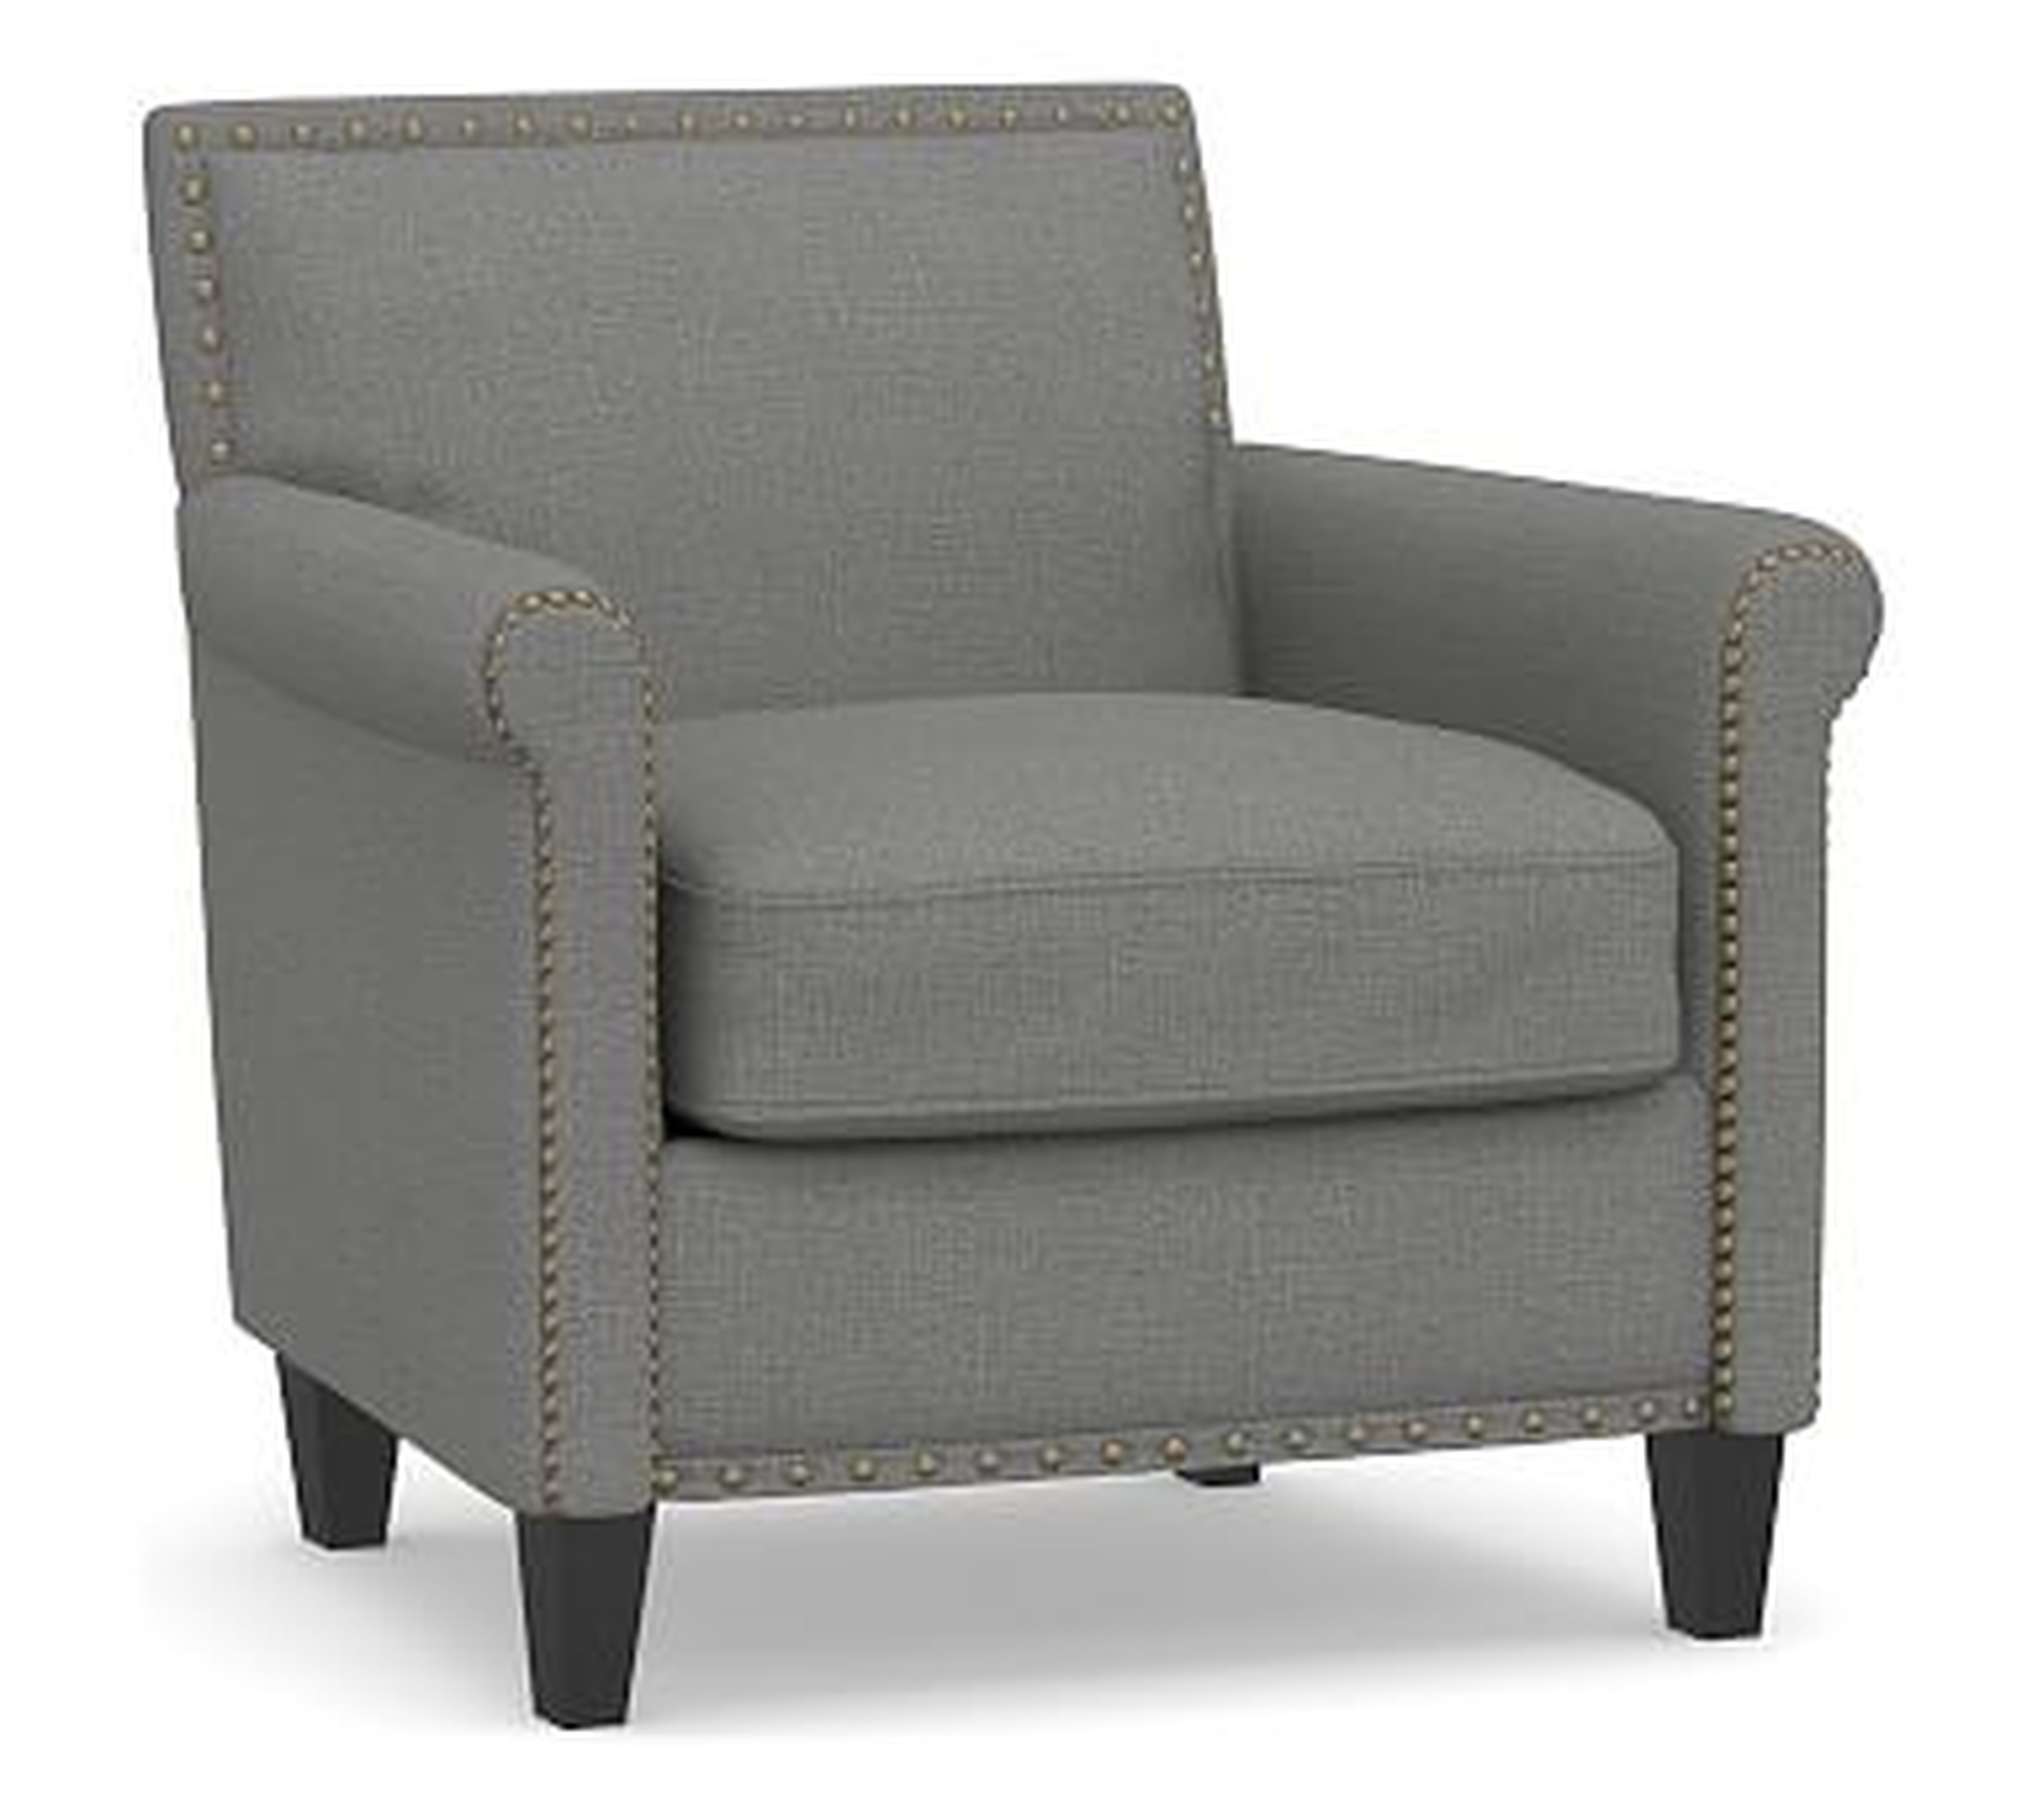 SoMa Roscoe Upholstered Armchair, Polyester Wrapped Cushions, Basketweave Slub Charcoal - Pottery Barn